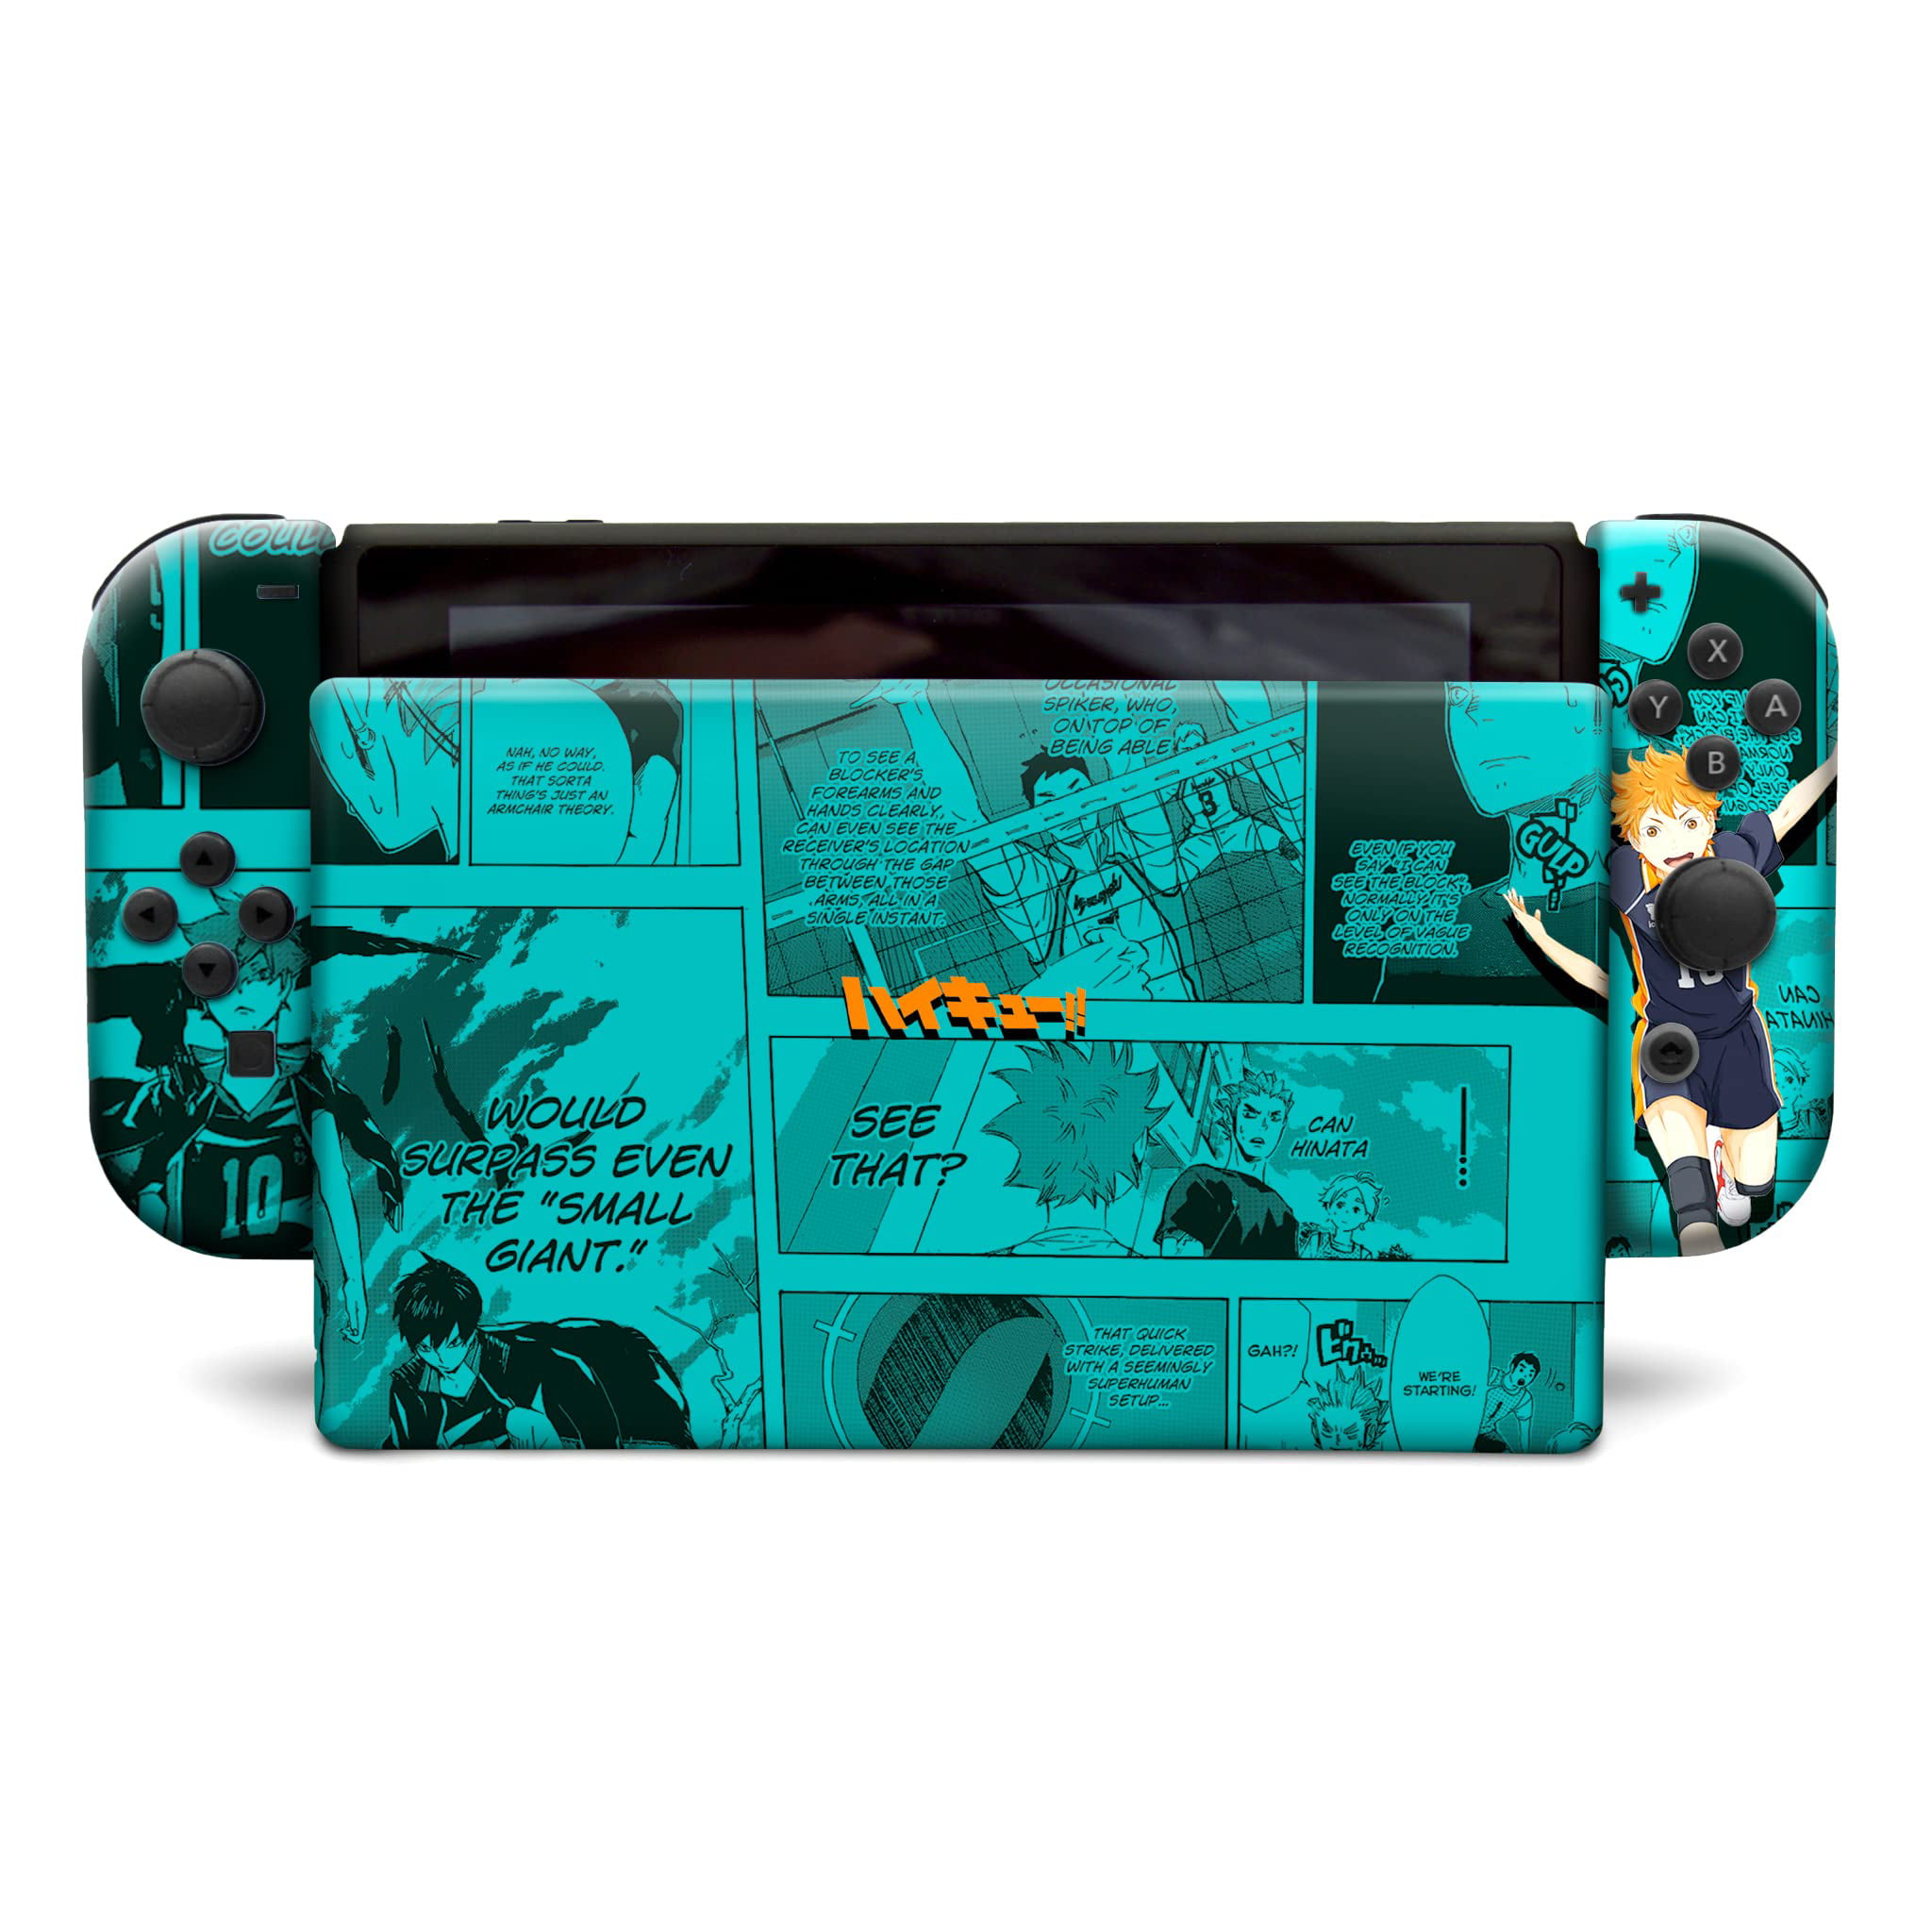 Uden tvivl Bulk makker Nintendo Switch Limited Edition Customized in USA I Comes with All Original  Nintendo Switch Accessories | Proudly Customized with Advanced Permanent  Hydro-Dip Technology (Not Just a Skin) - Walmart.com